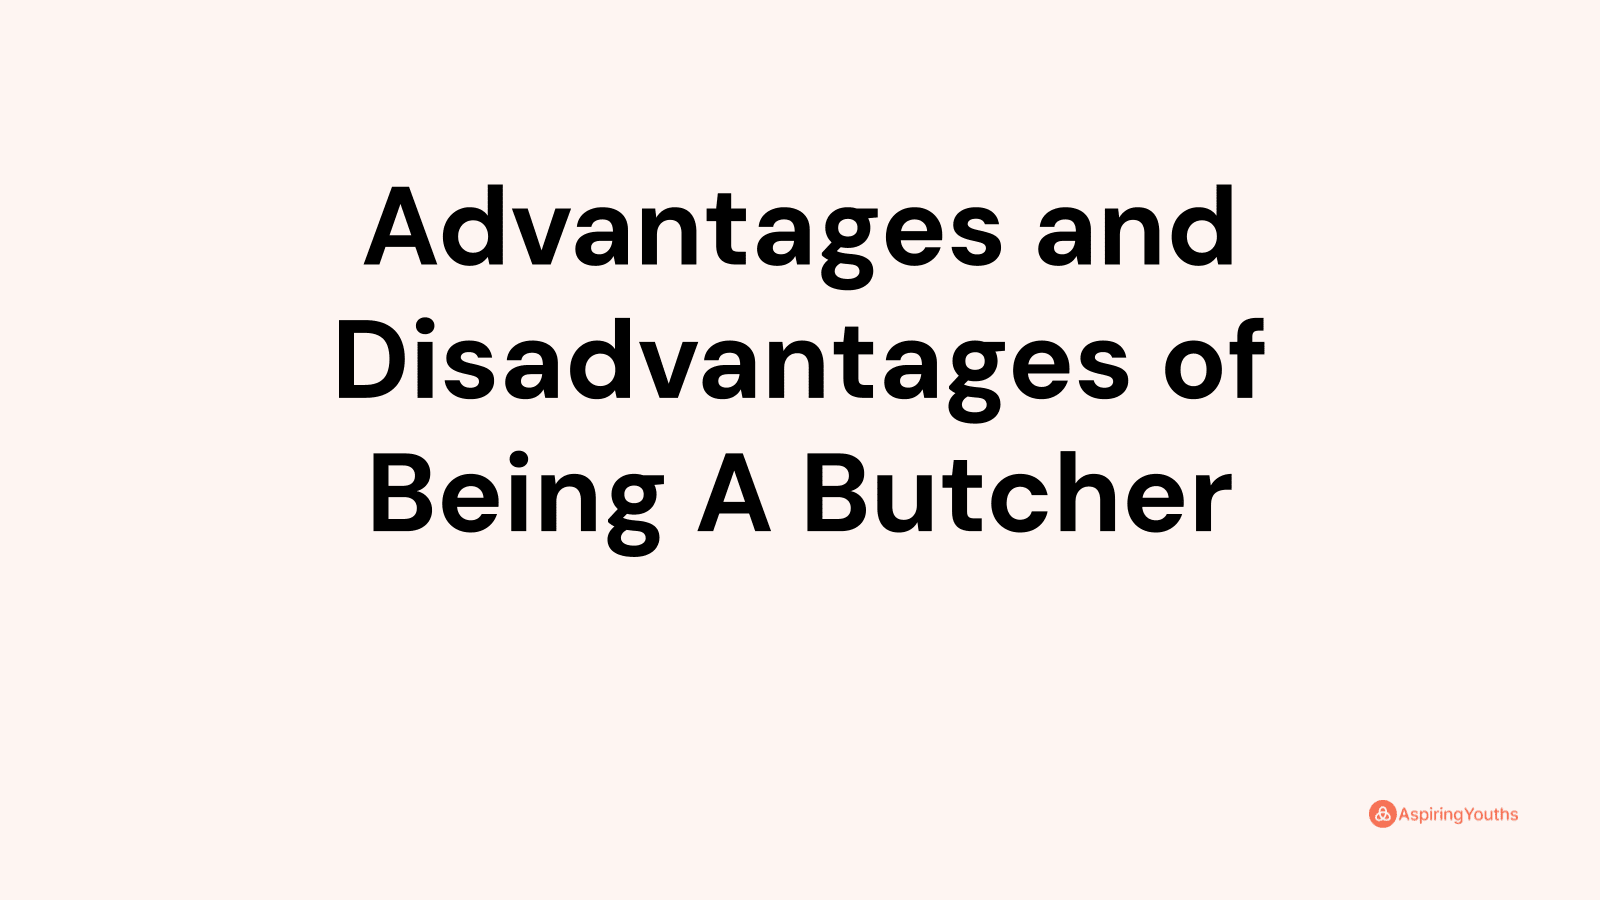 Advantages and disadvantages of Being A Butcher